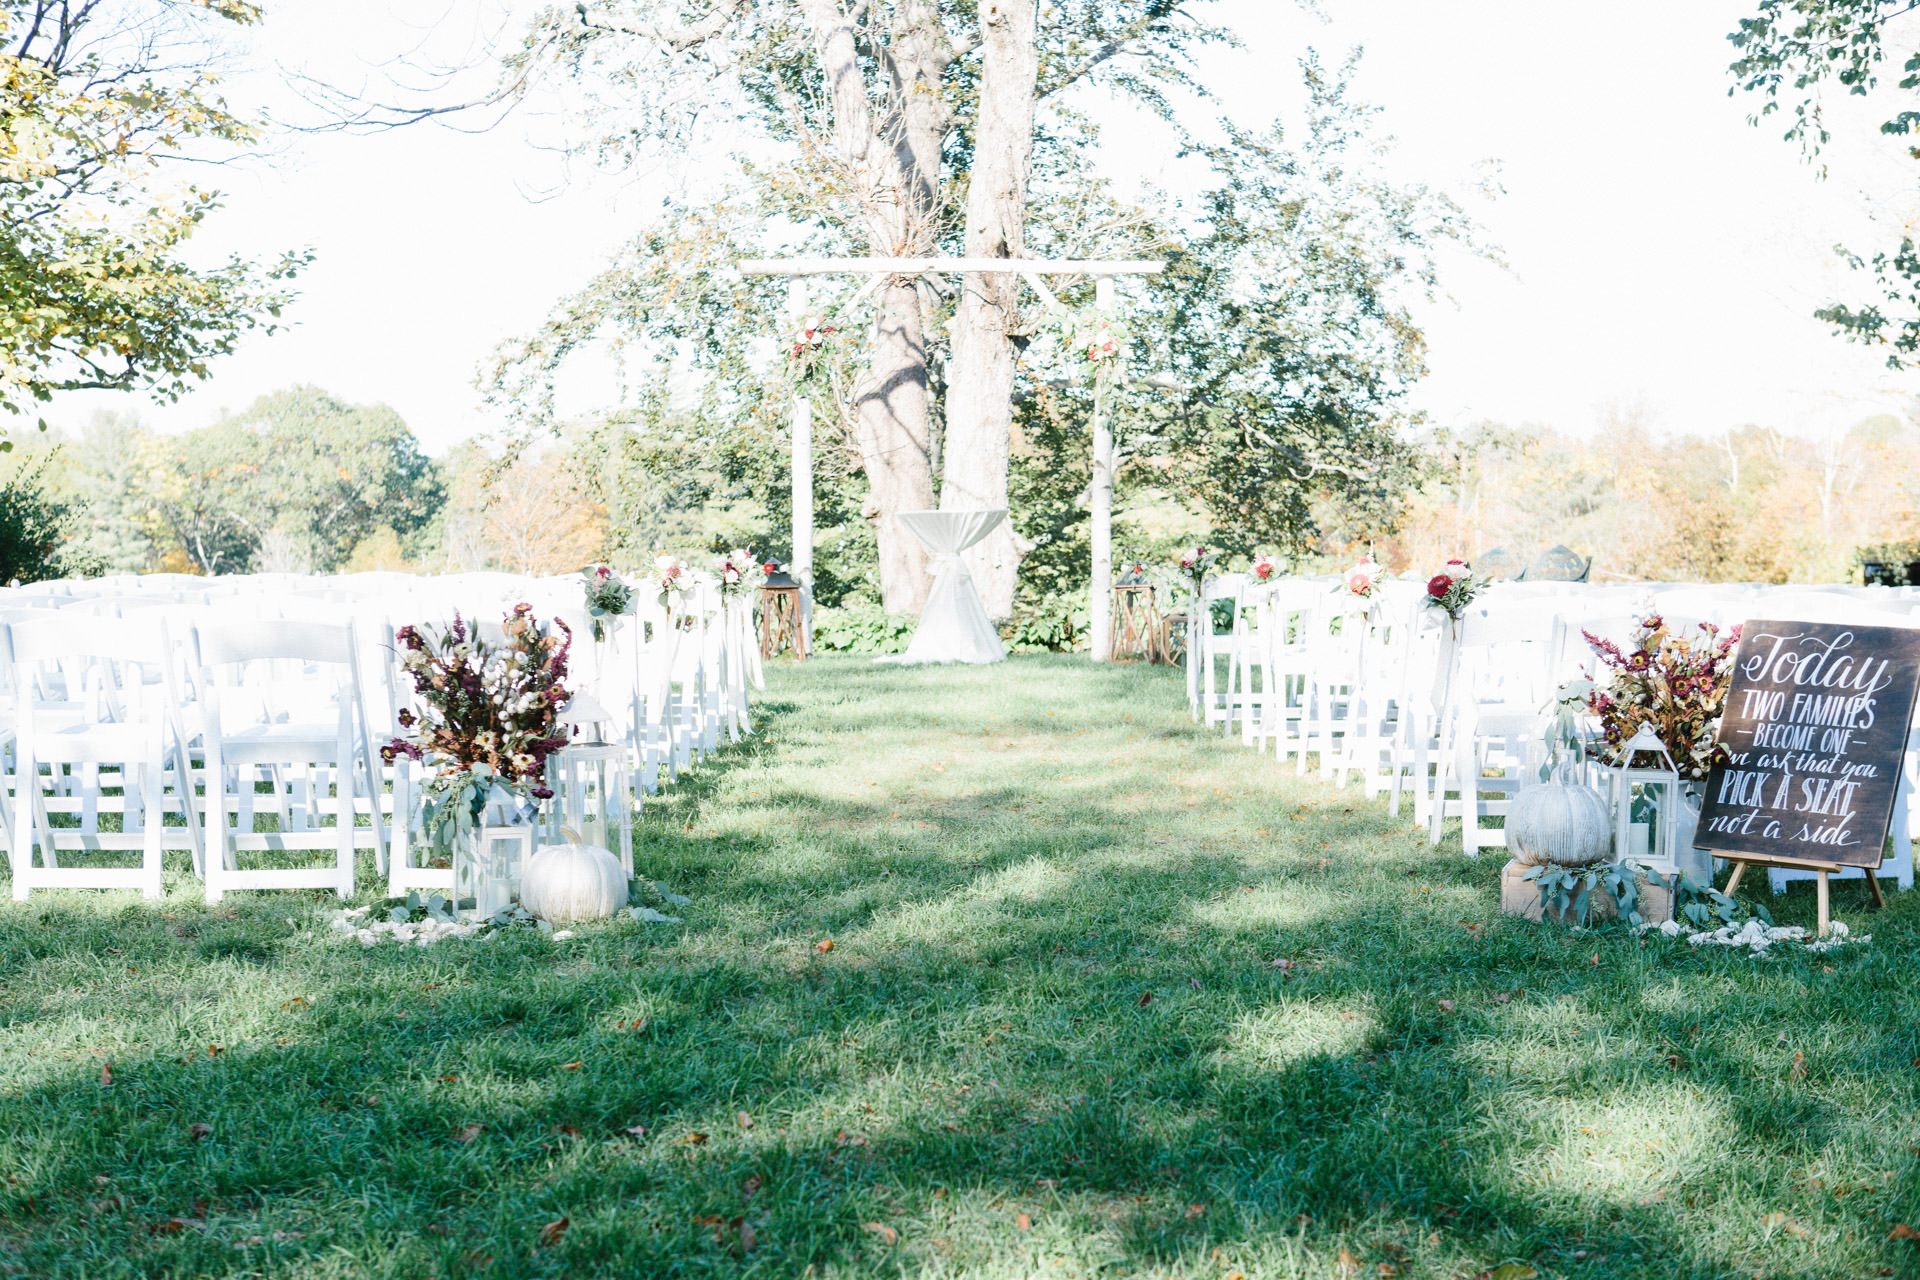 Ceremony location and seats